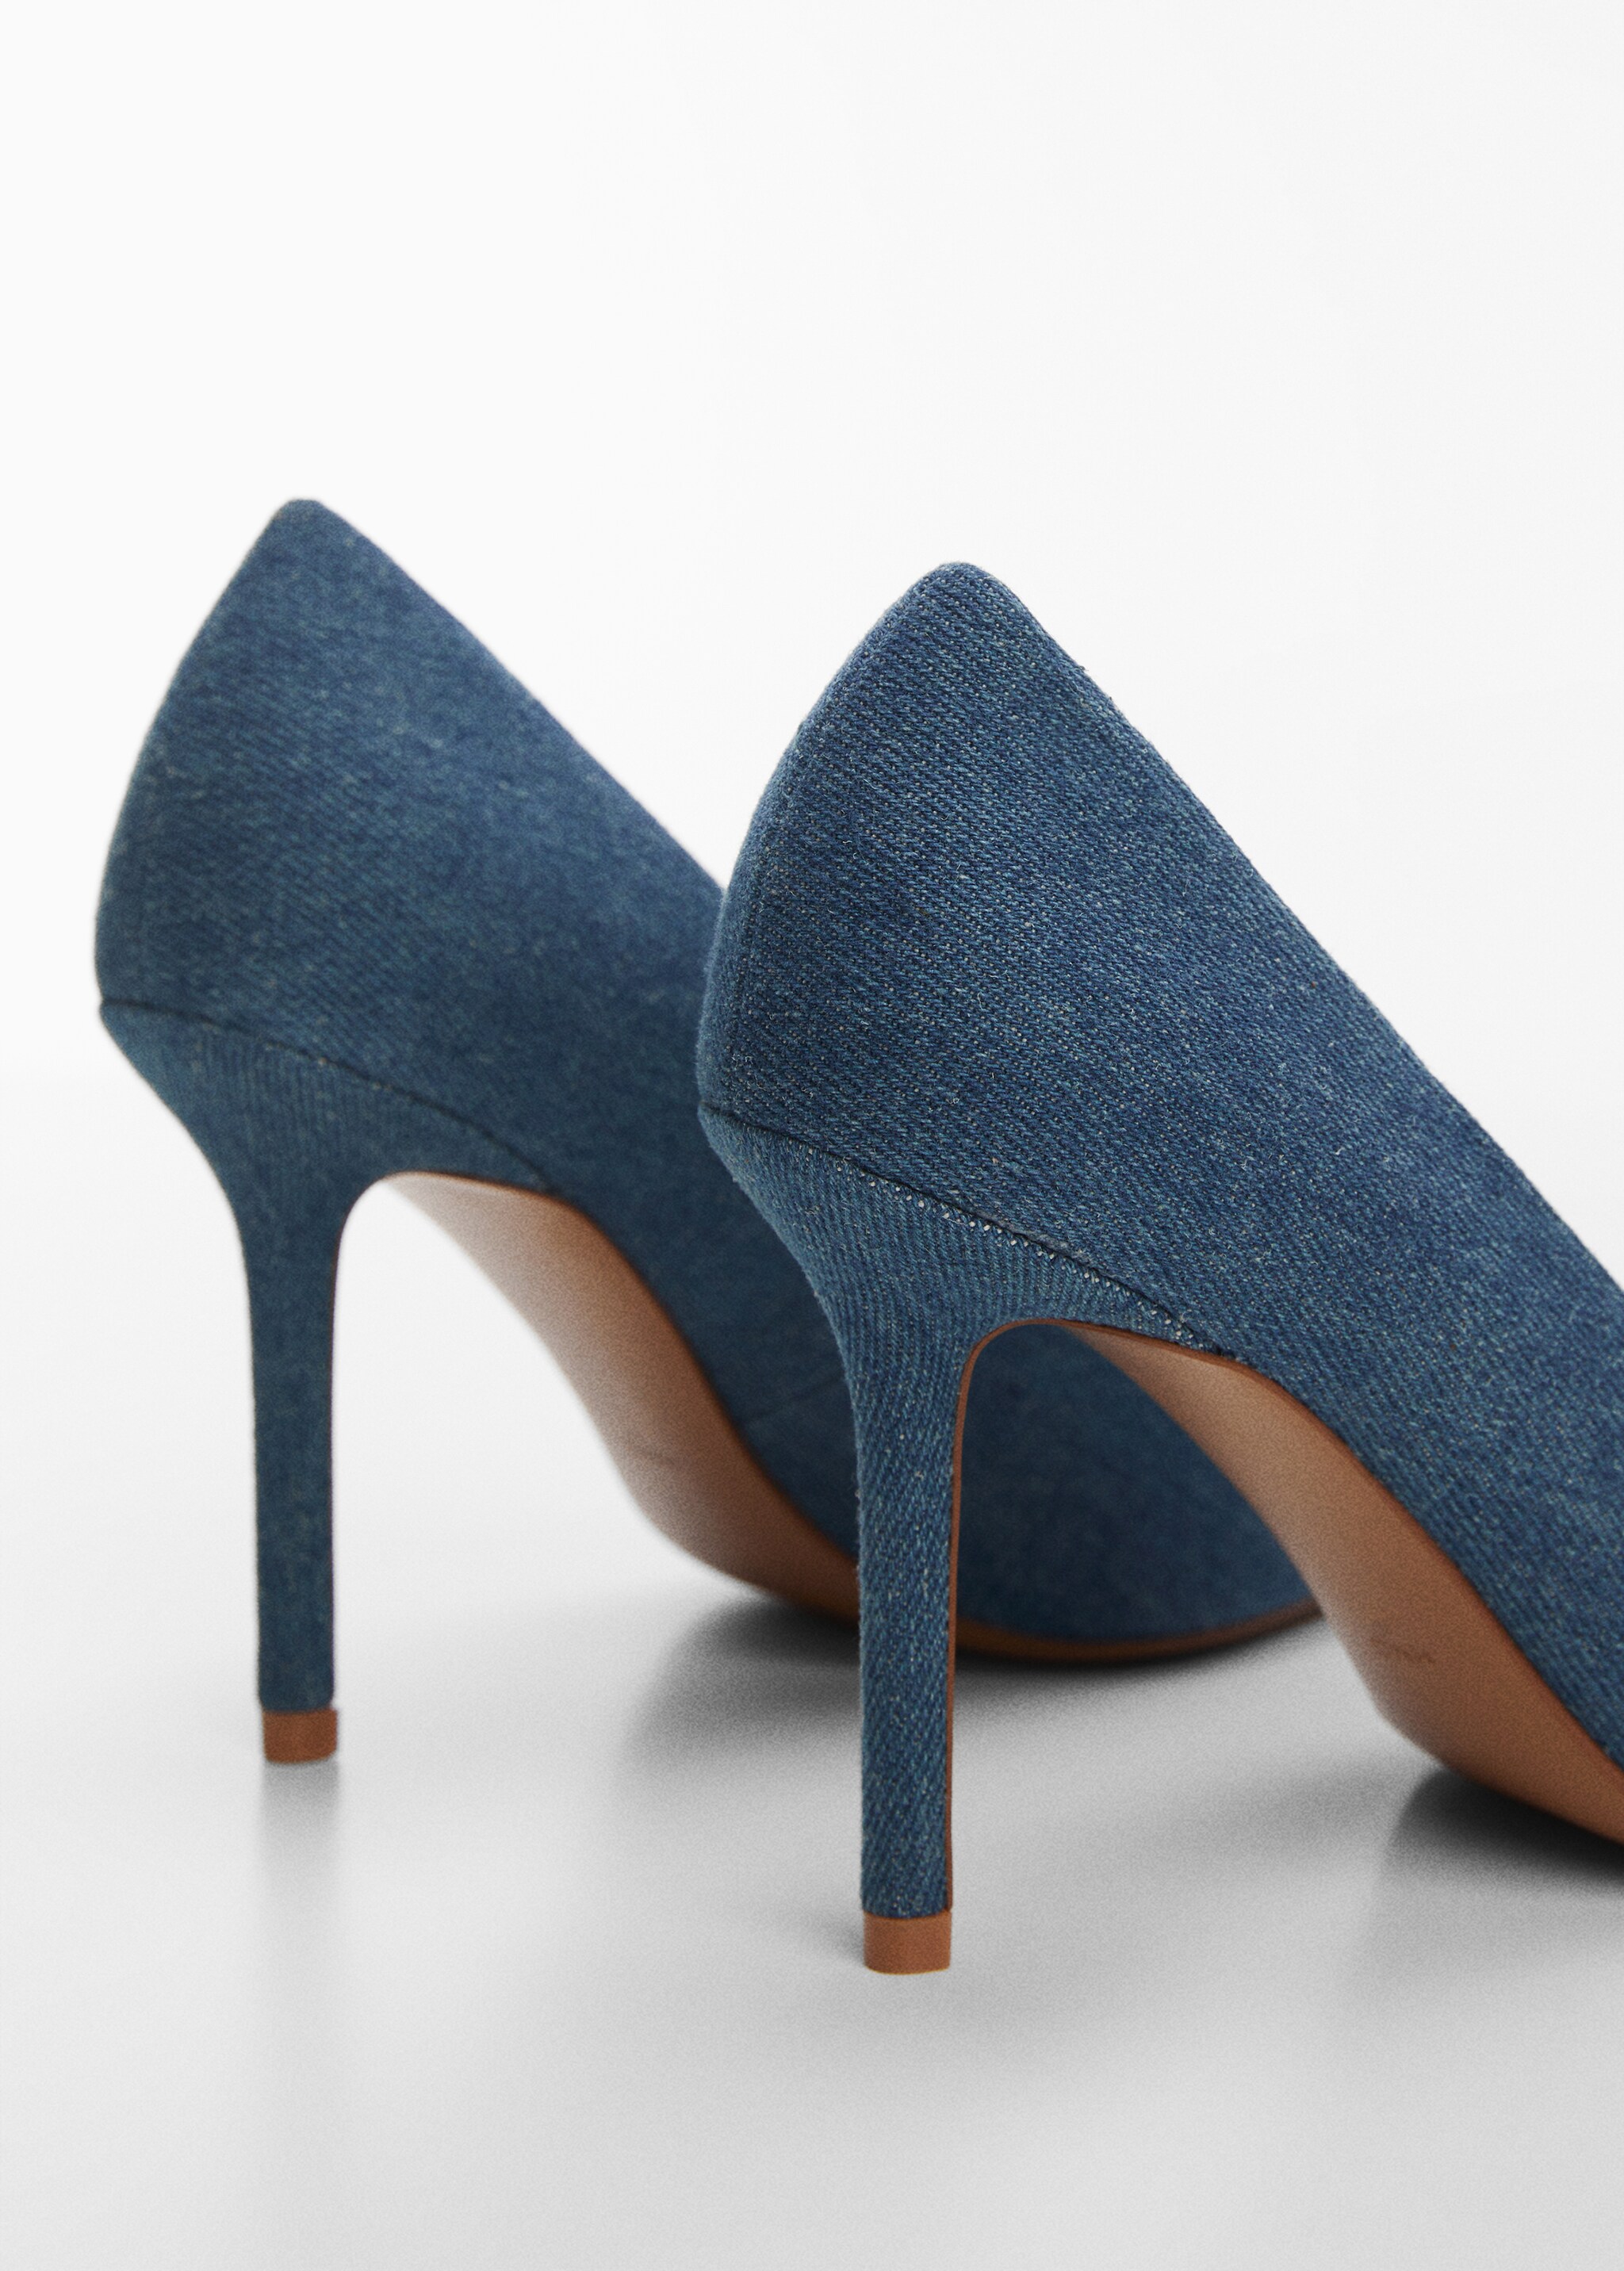 Denim shoes with rhinestone detail - Details of the article 1